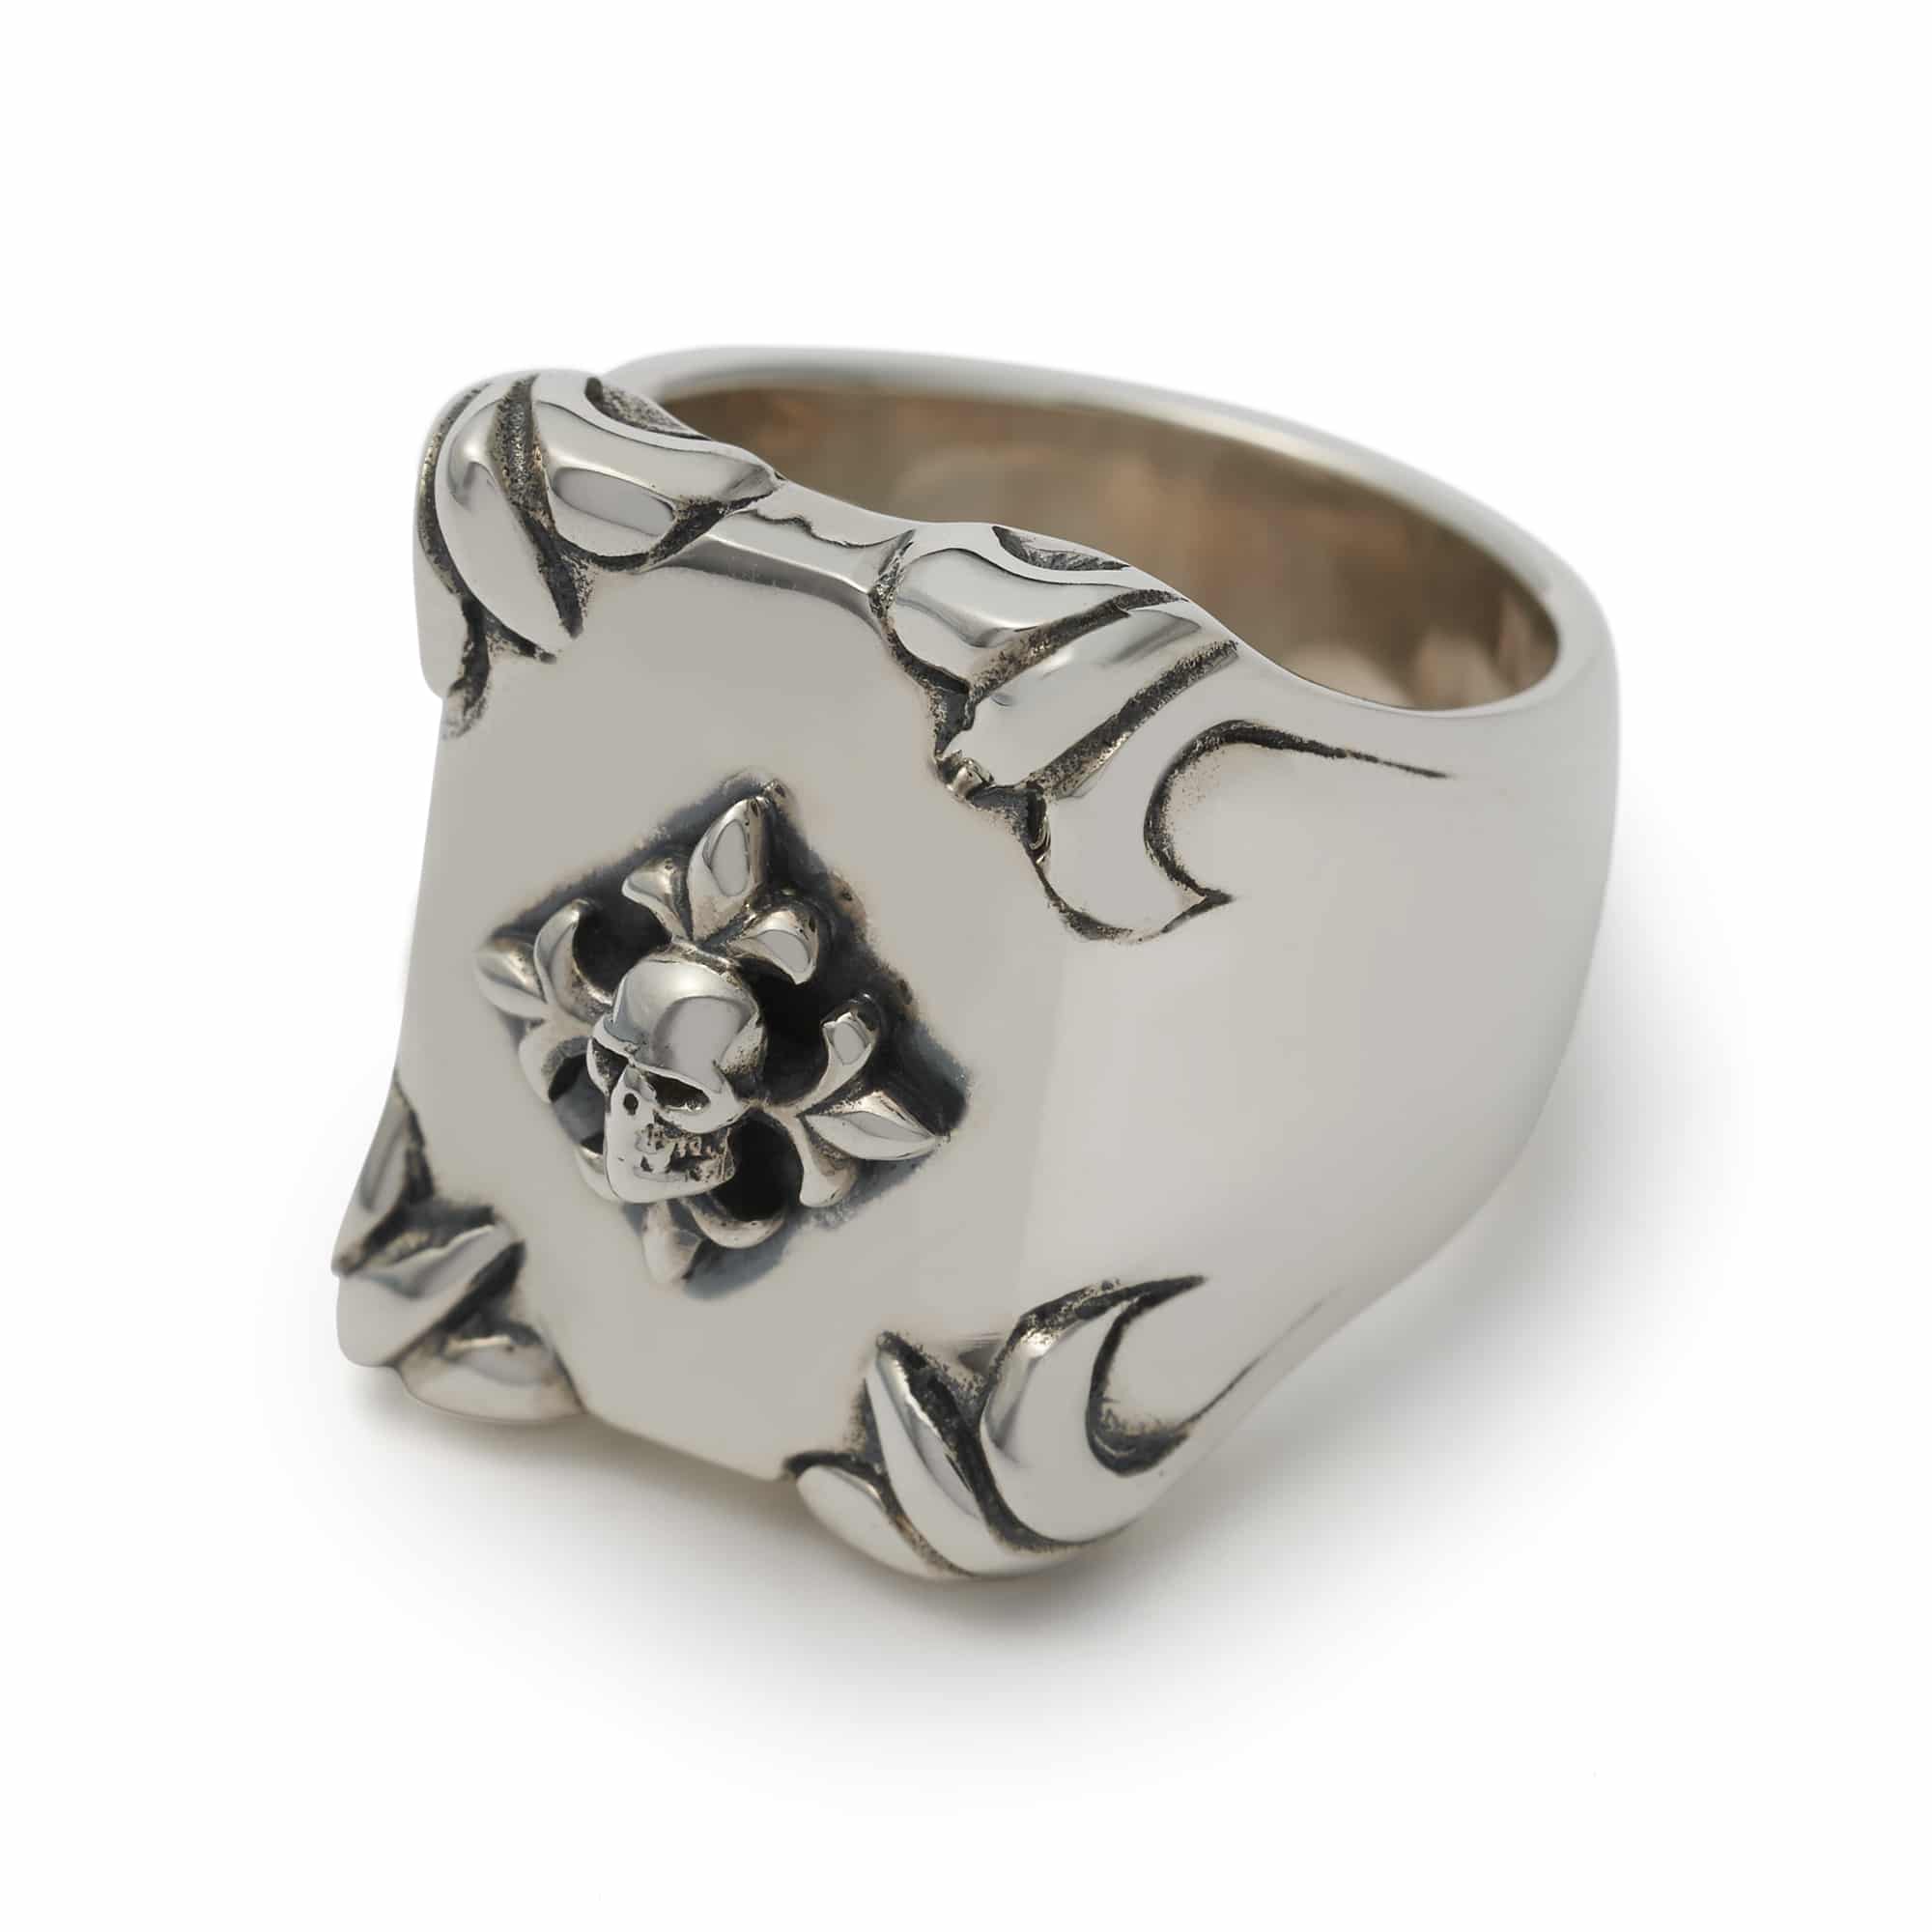 Shield_Ring_With_Silver_Fleur_De_Lis_And_Skull_205.jpg